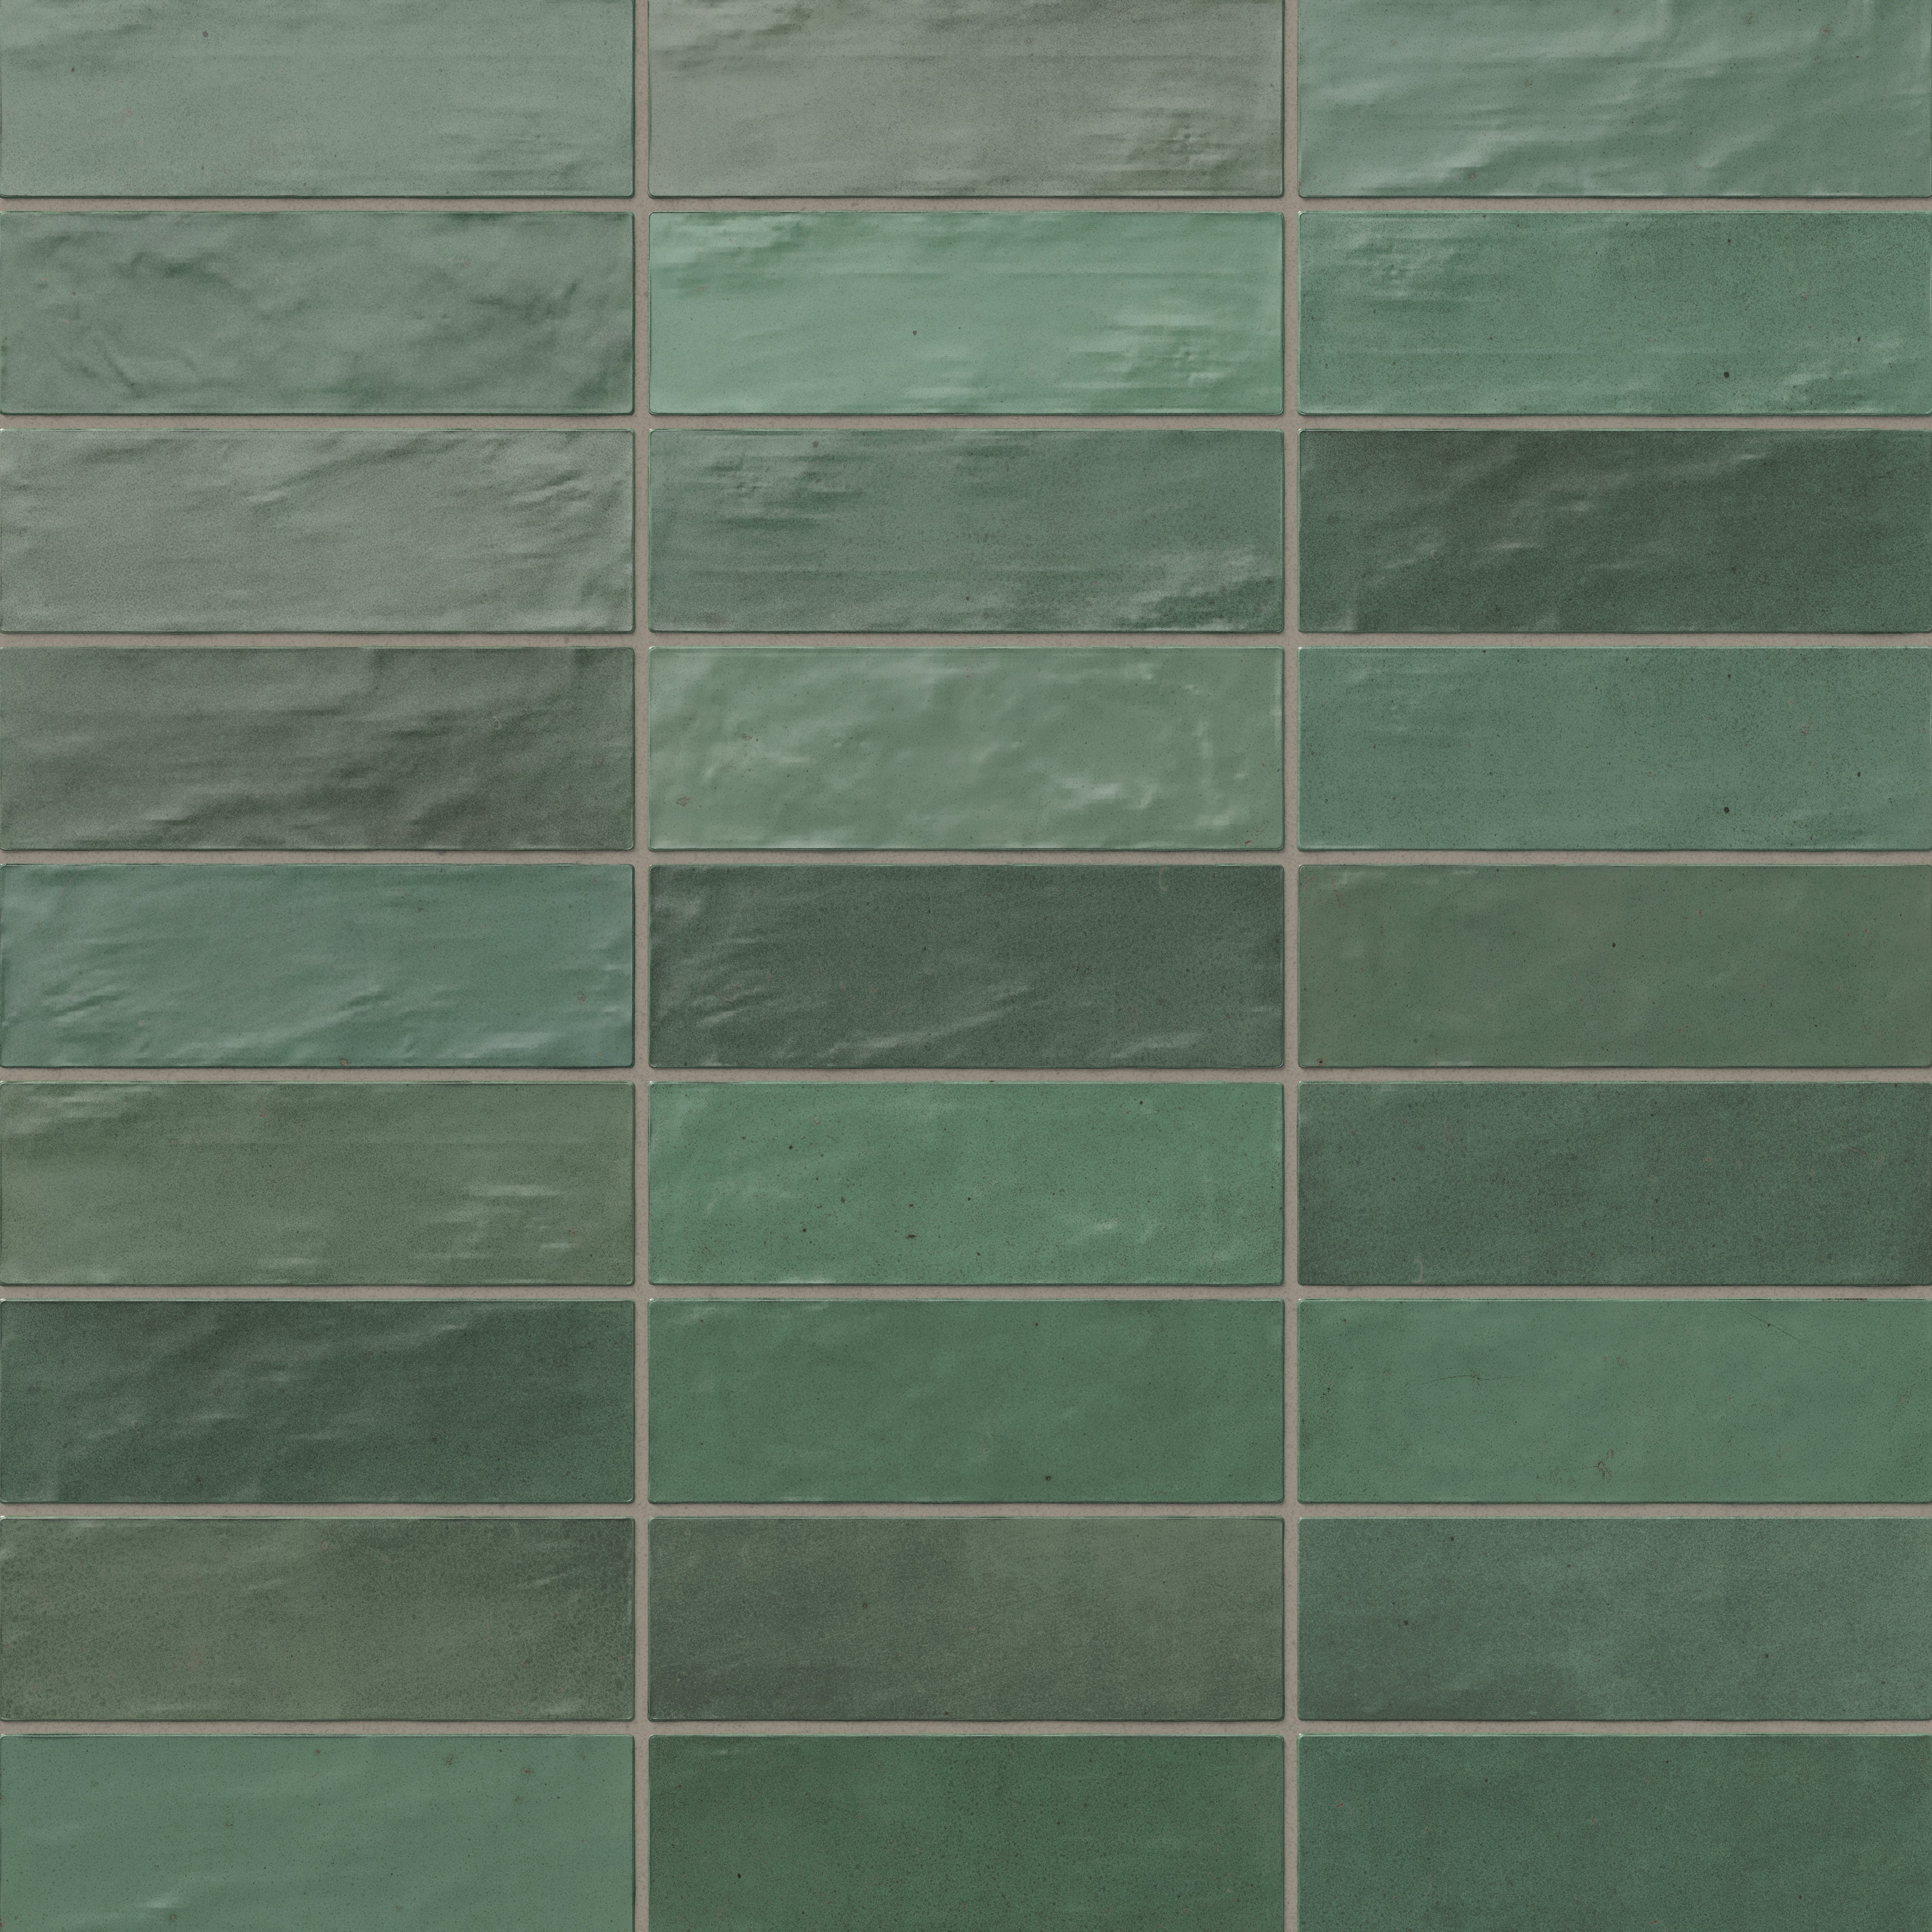 Everly 3x8 Matte Ceramic Tile in Forest